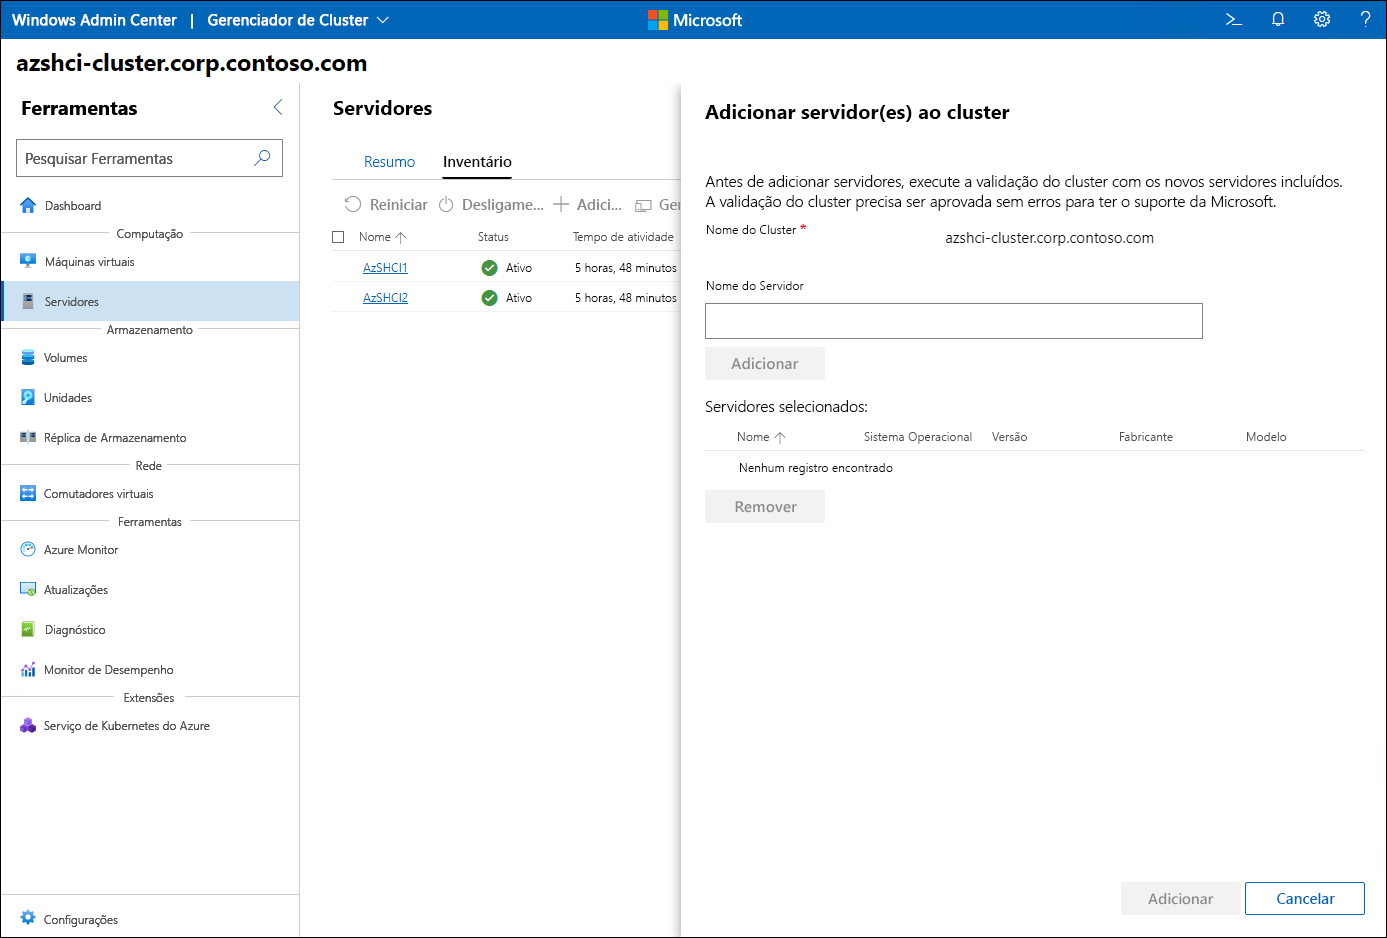 The screenshot depicts the Cluster Manager interface of Windows Admin Center displaying the Add server(s) to the cluster pane.